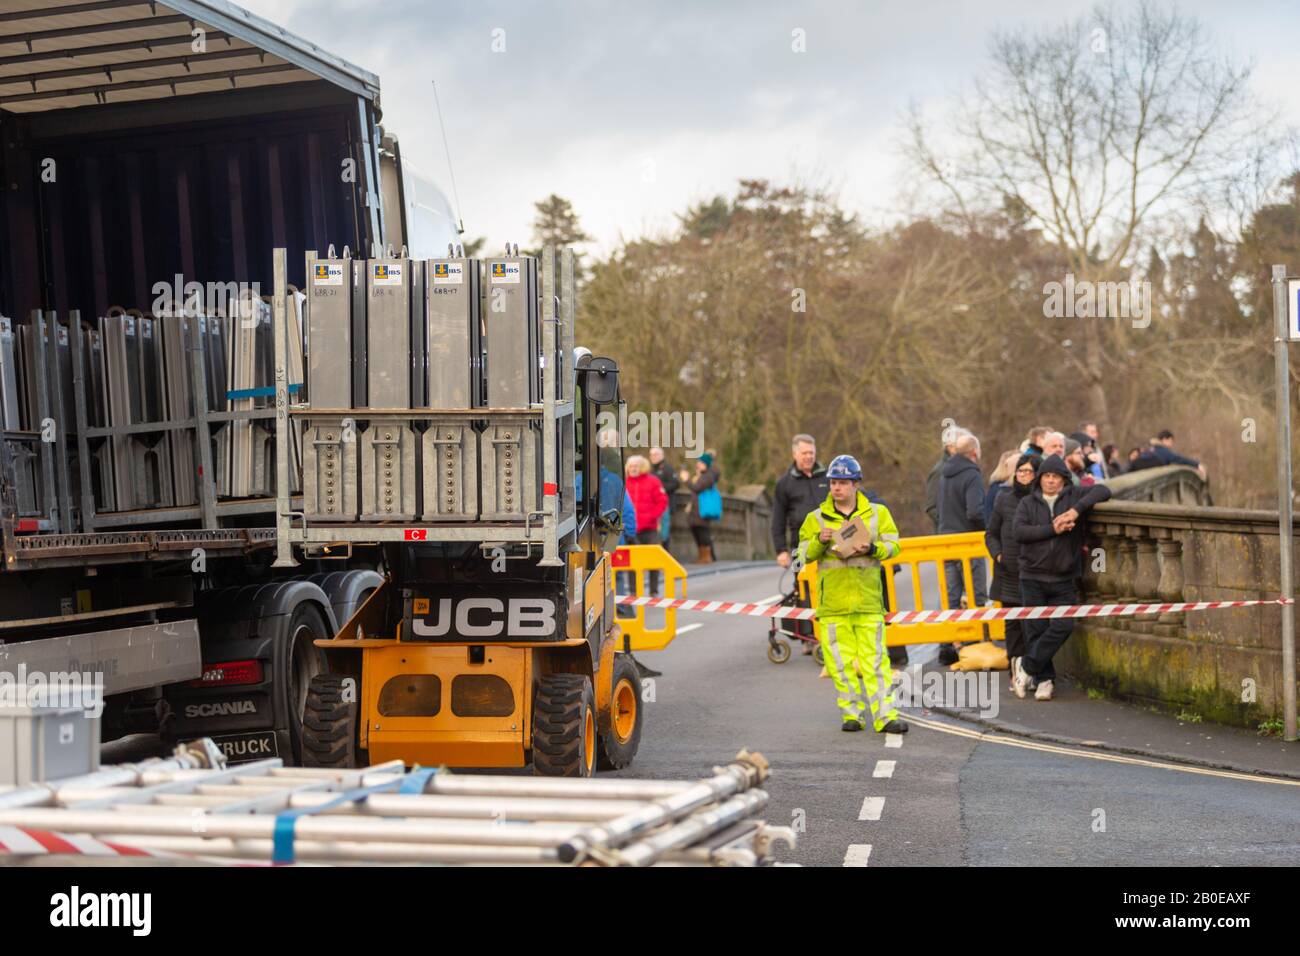 Environment Agency UK setting up or erecting flood barrier defences on the River Severn at Bewdley, UK Stock Photo